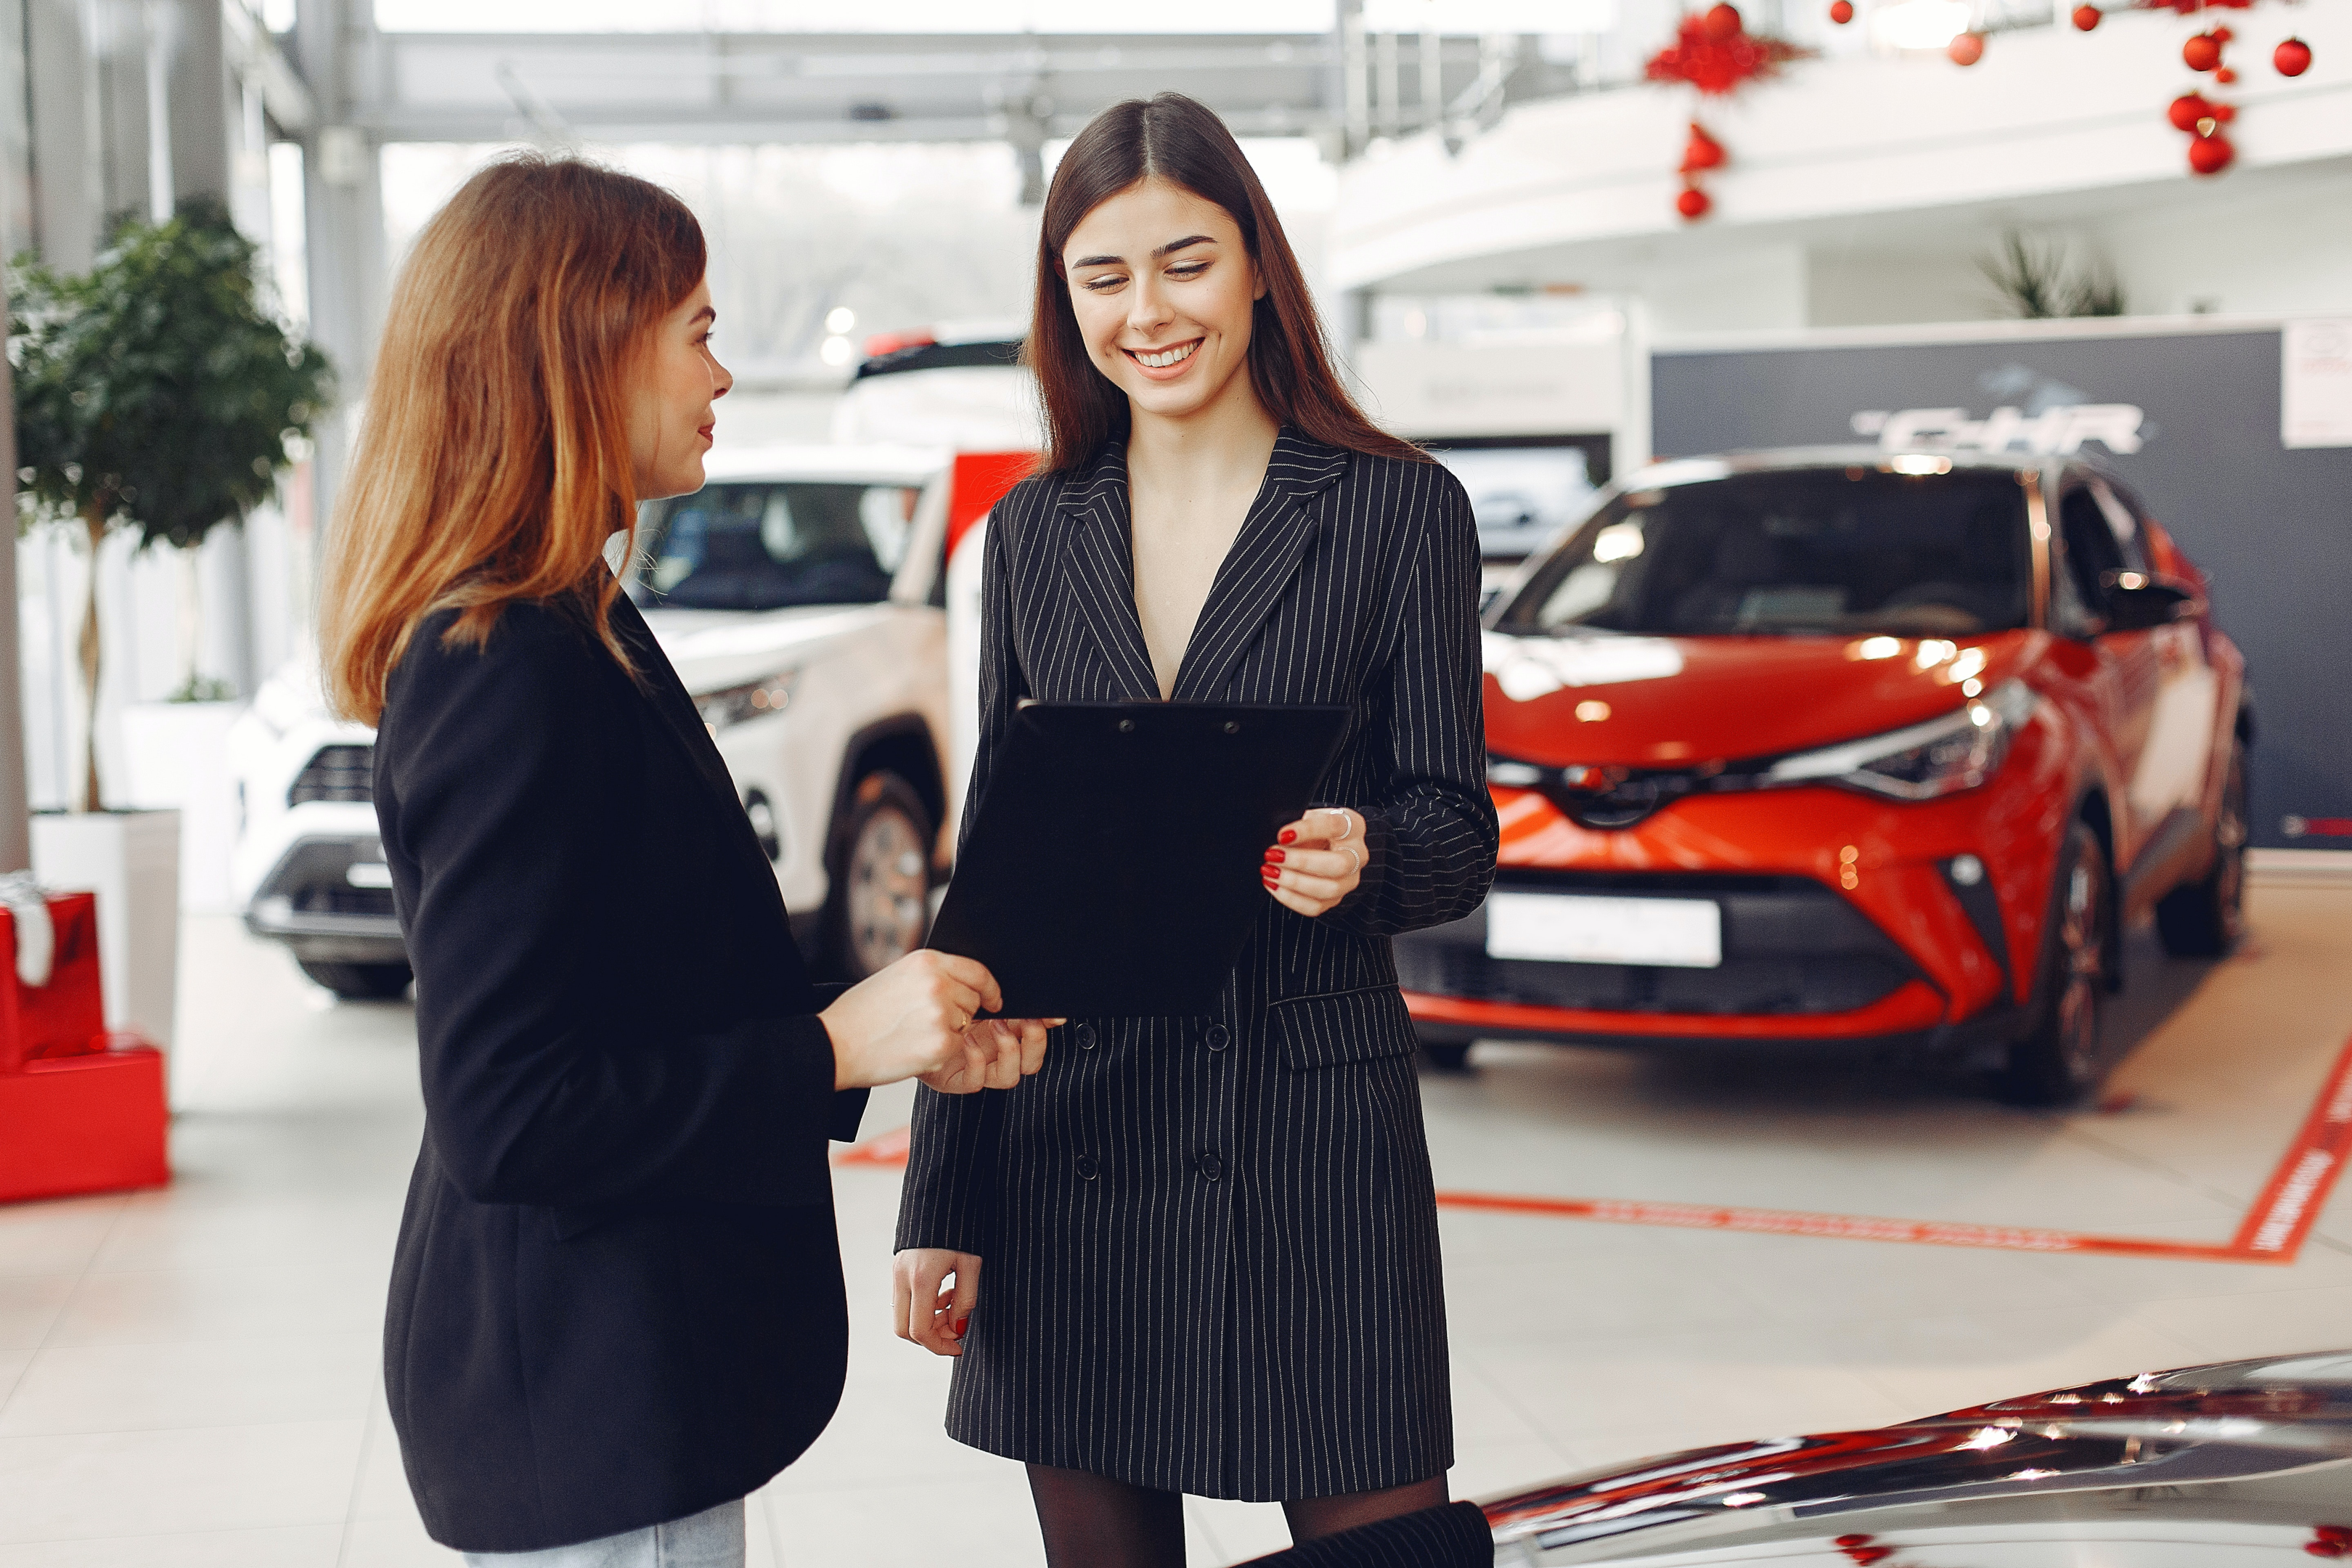 What should you not say to a car salesman?